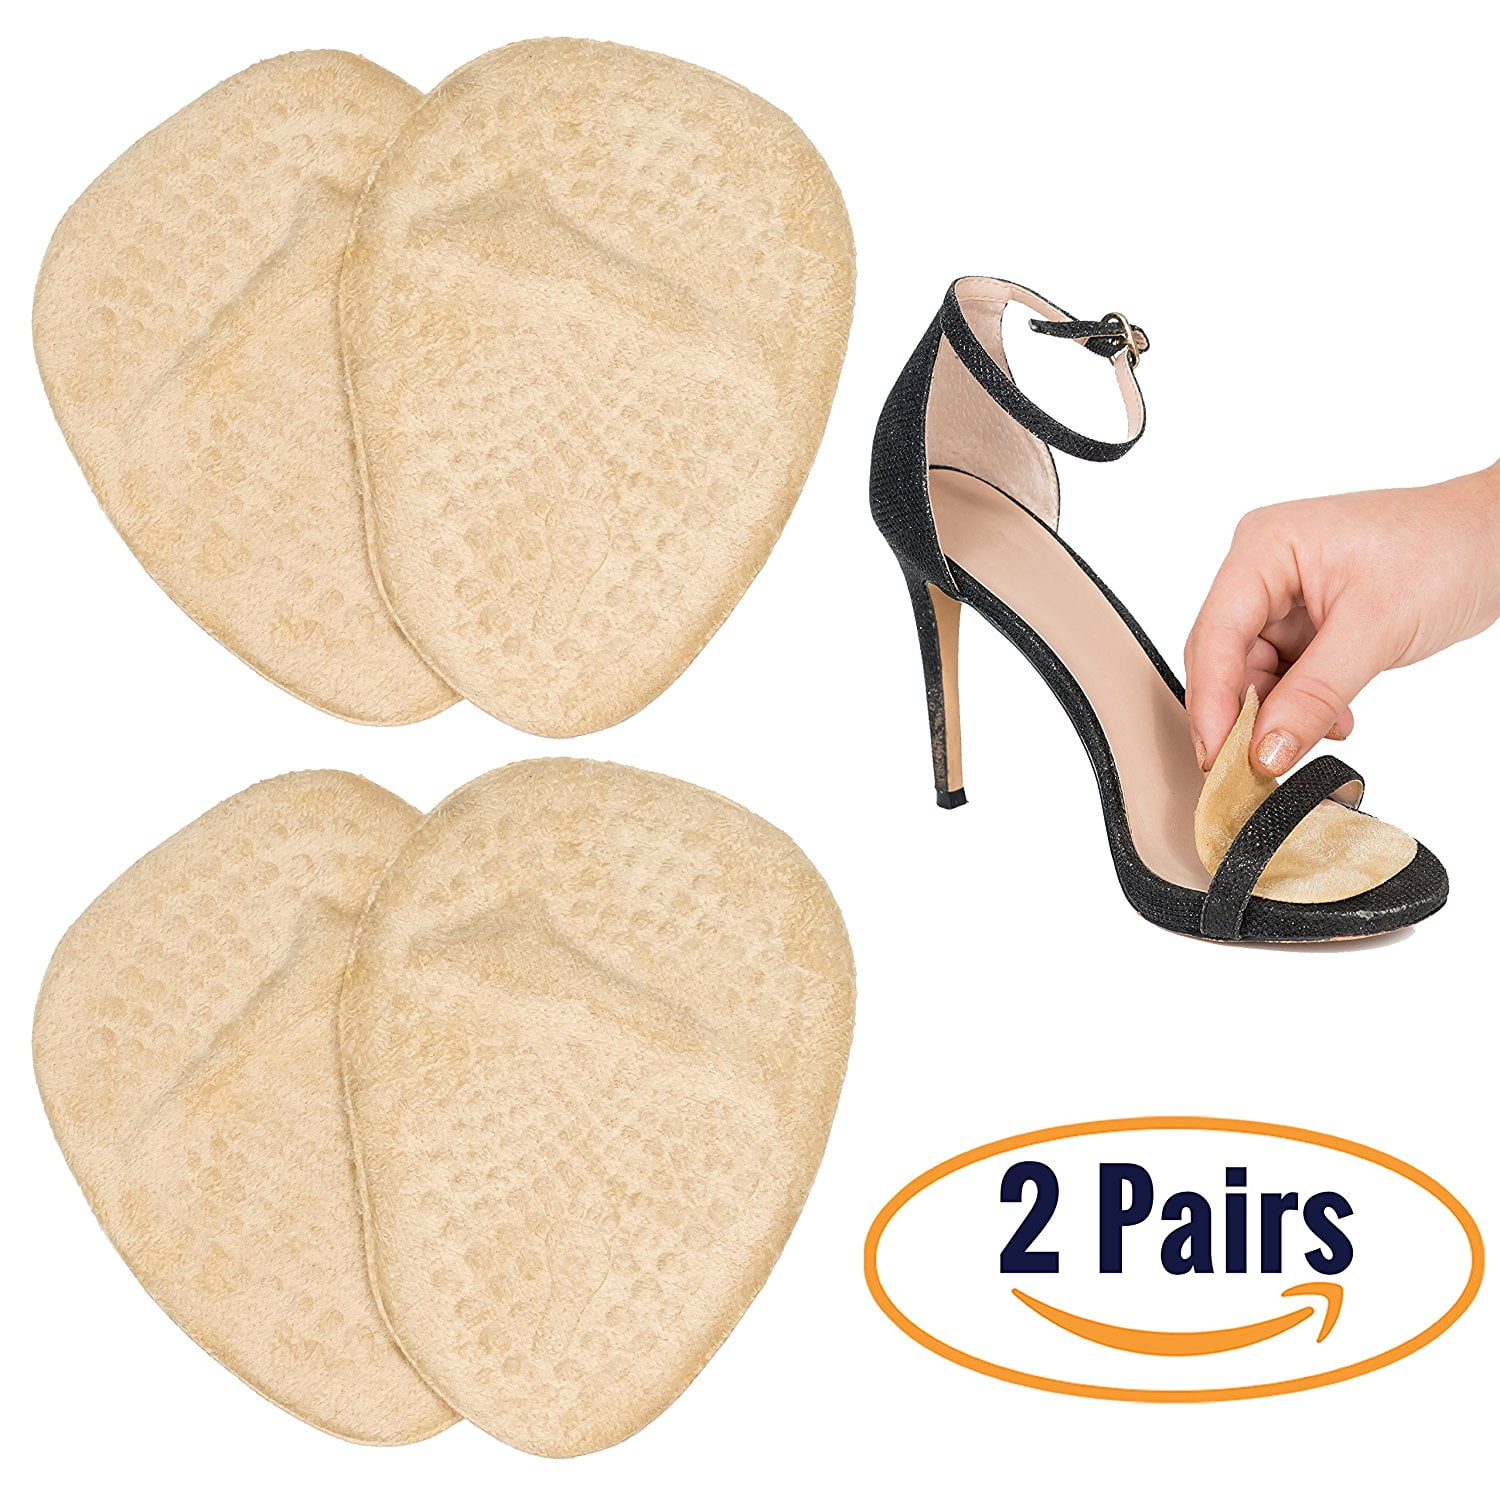 iBesun 2 Pairs Metatarsal Pads Ball of Foot Cushions Forefoot Shoe Insole for Women High Heels All Day Pain Relief Black + Beige